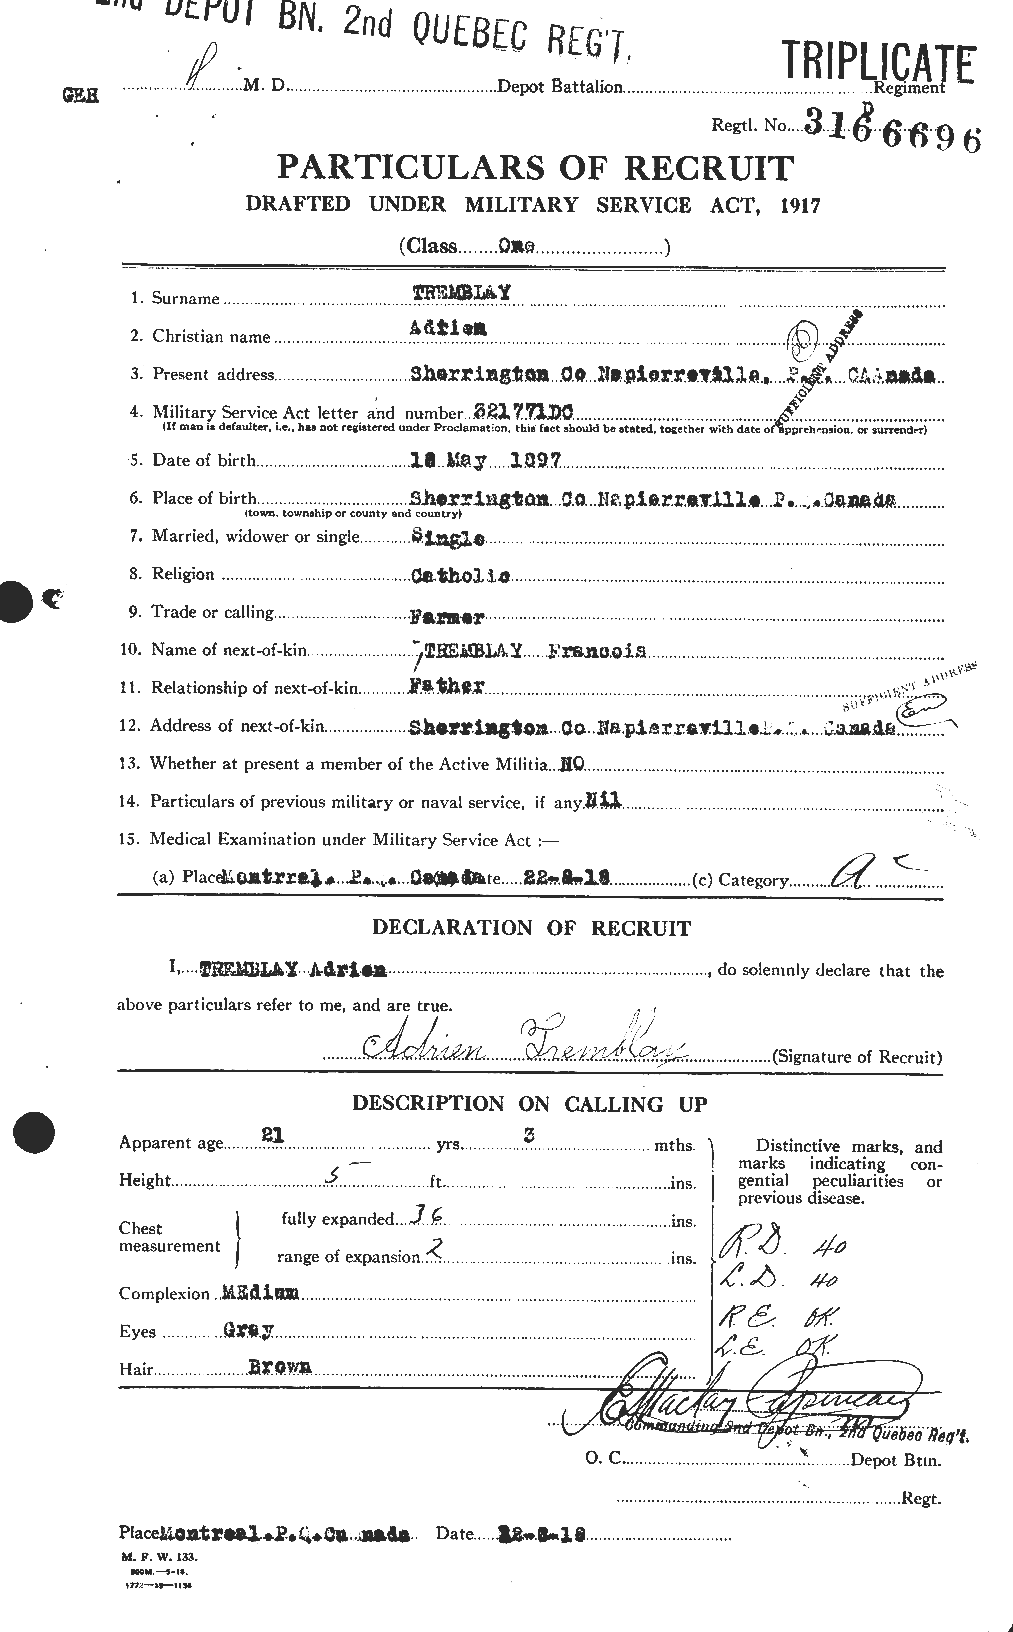 Personnel Records of the First World War - CEF 637564a